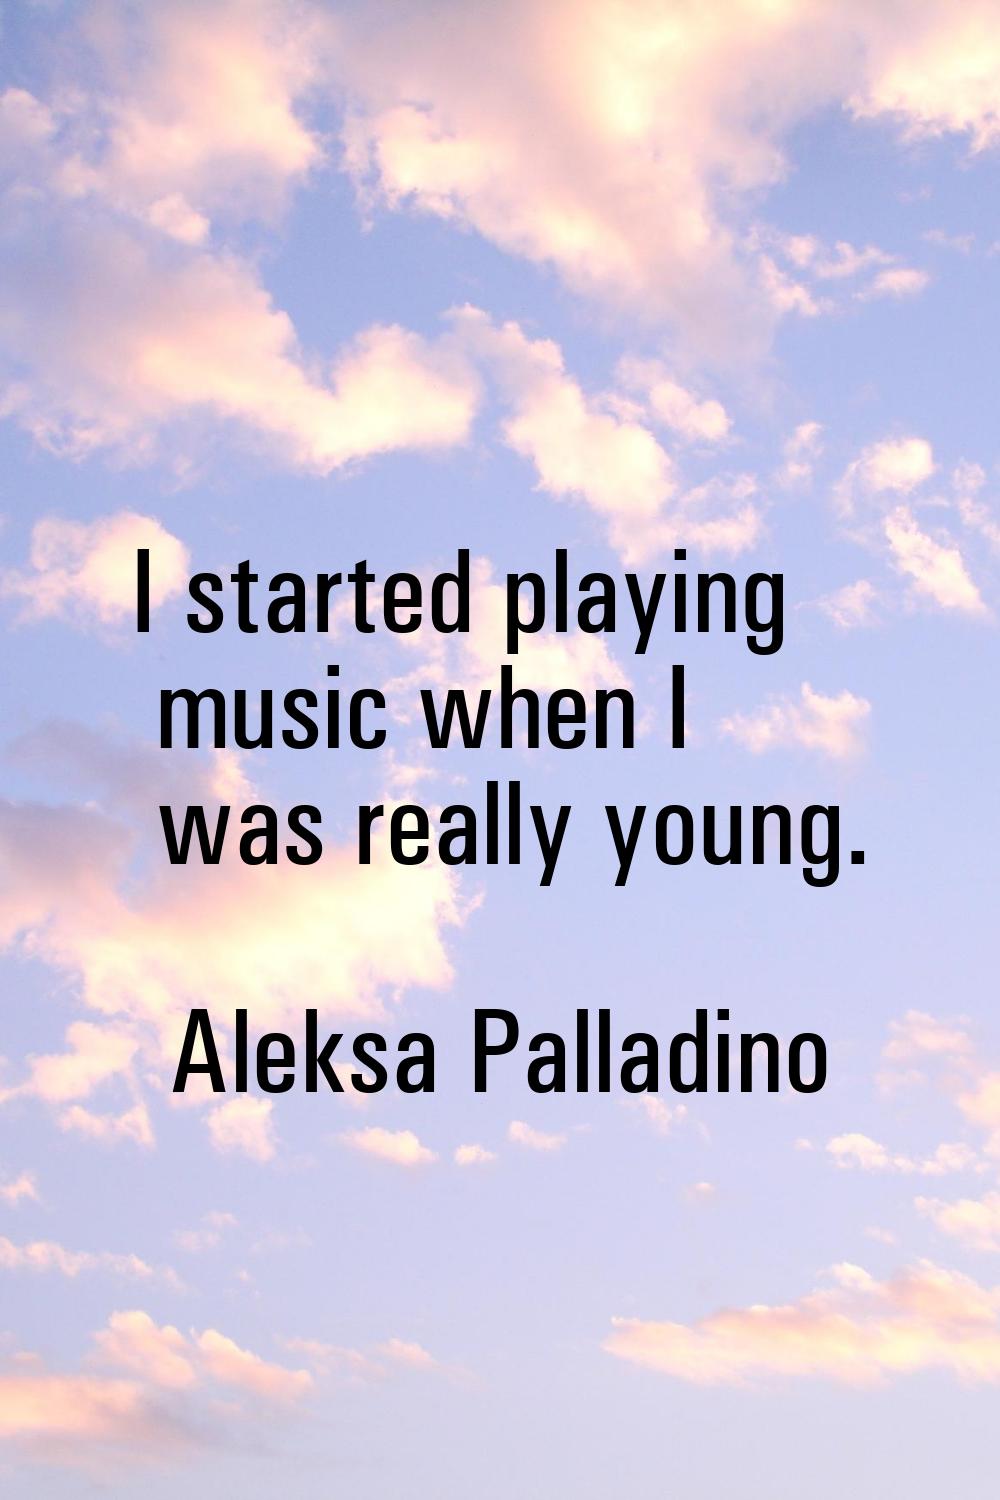 I started playing music when I was really young.